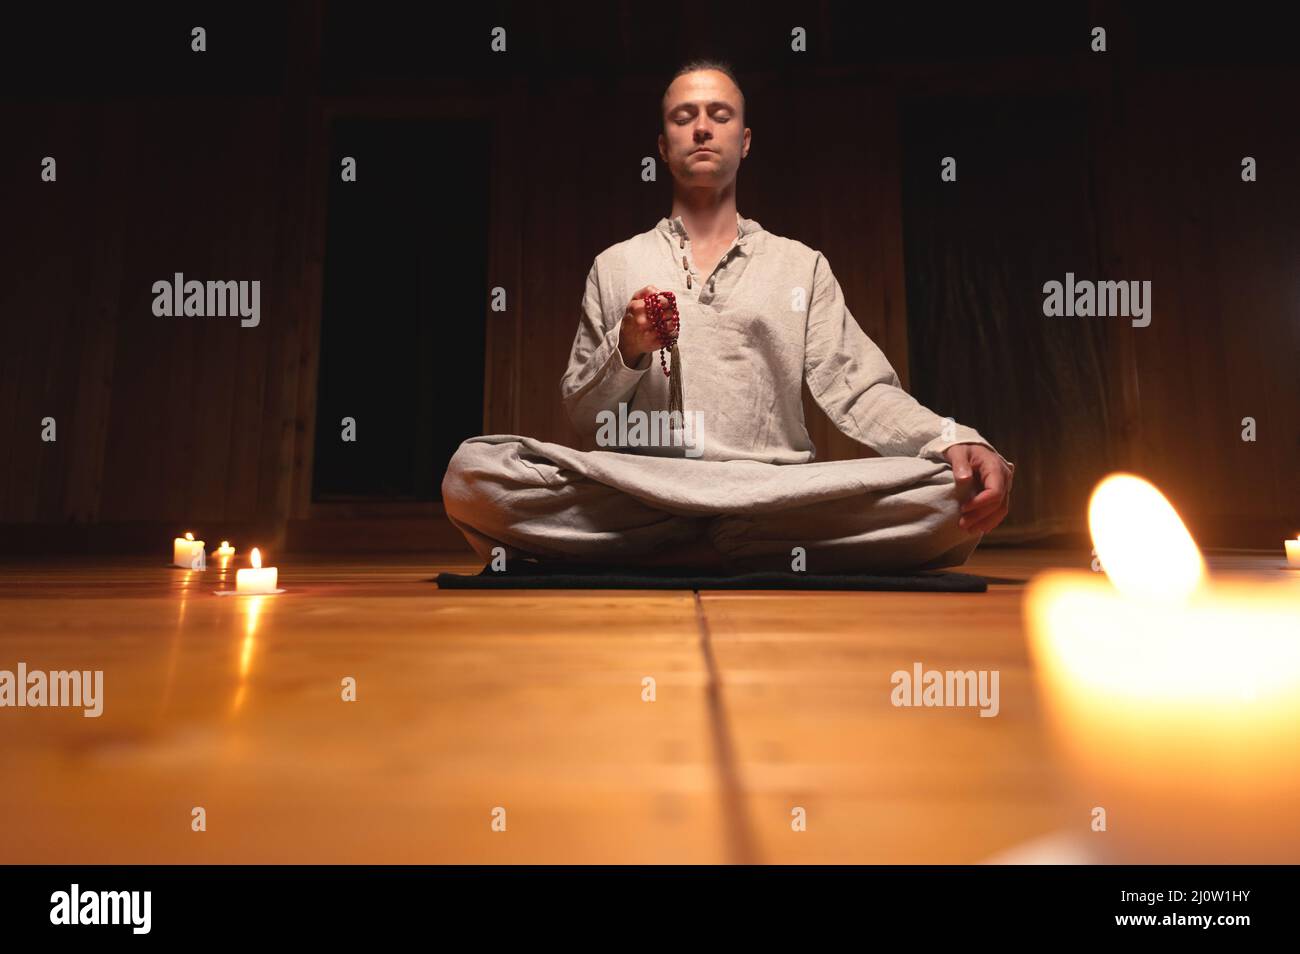 A man in clothes for practice and meditation sits in a lotus pose and holds red rosary to concentrate attention in a wooden room Stock Photo